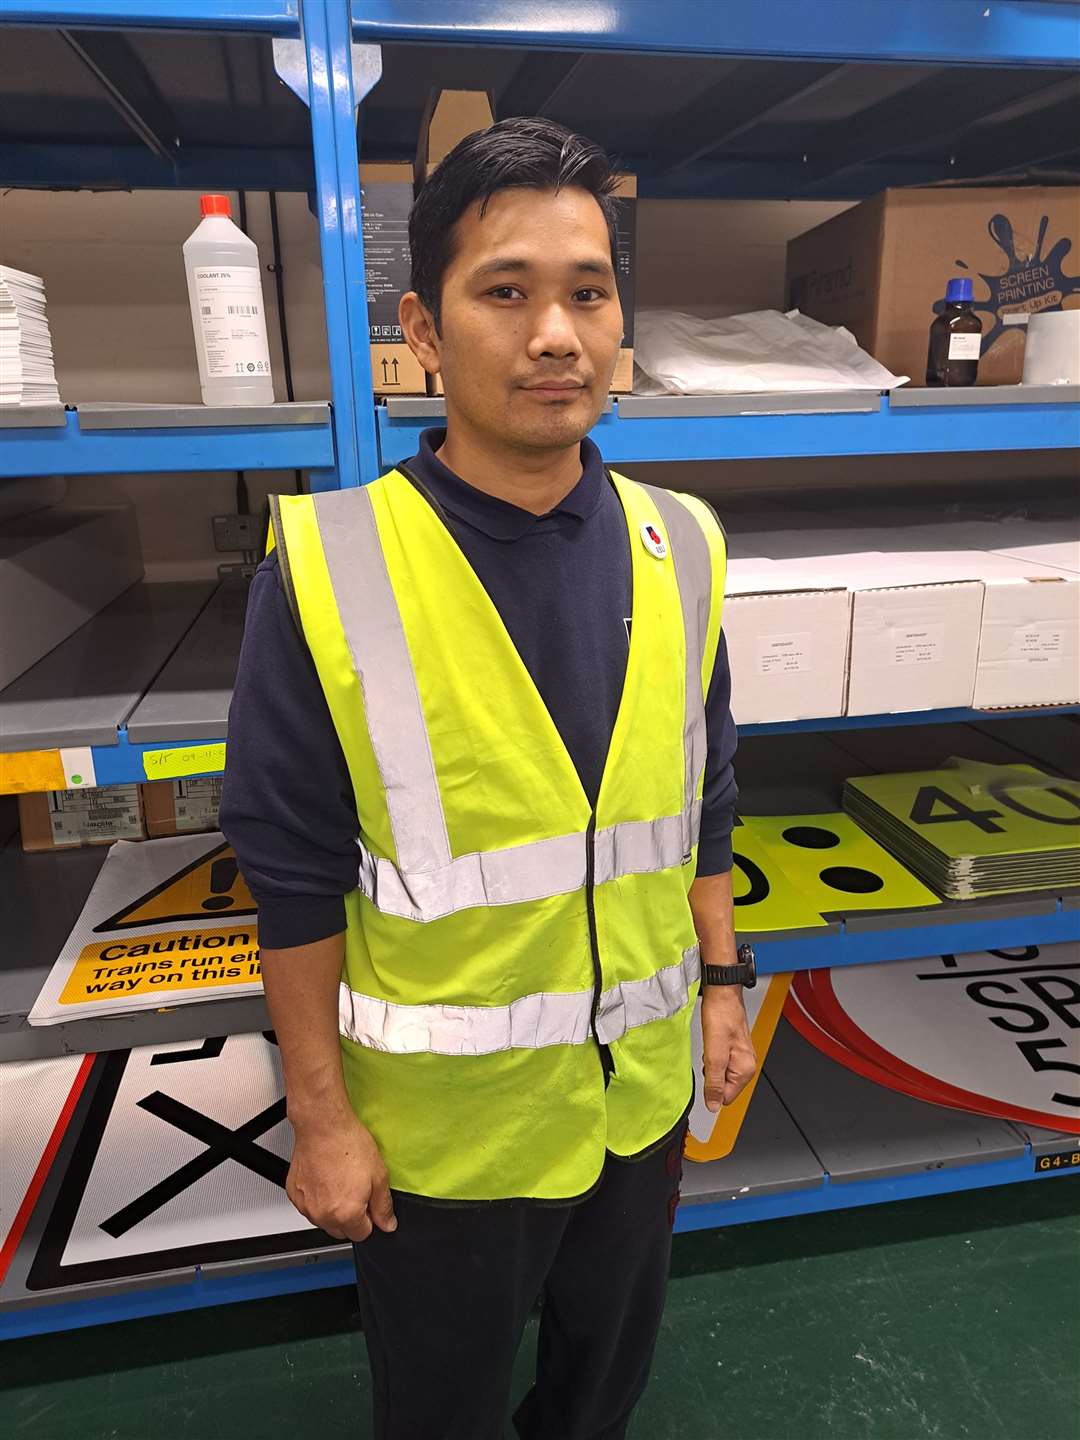 Gurkha Tirthrai Thapi lost a leg to an IED in Afghanistan. He now works at the RBLI factory